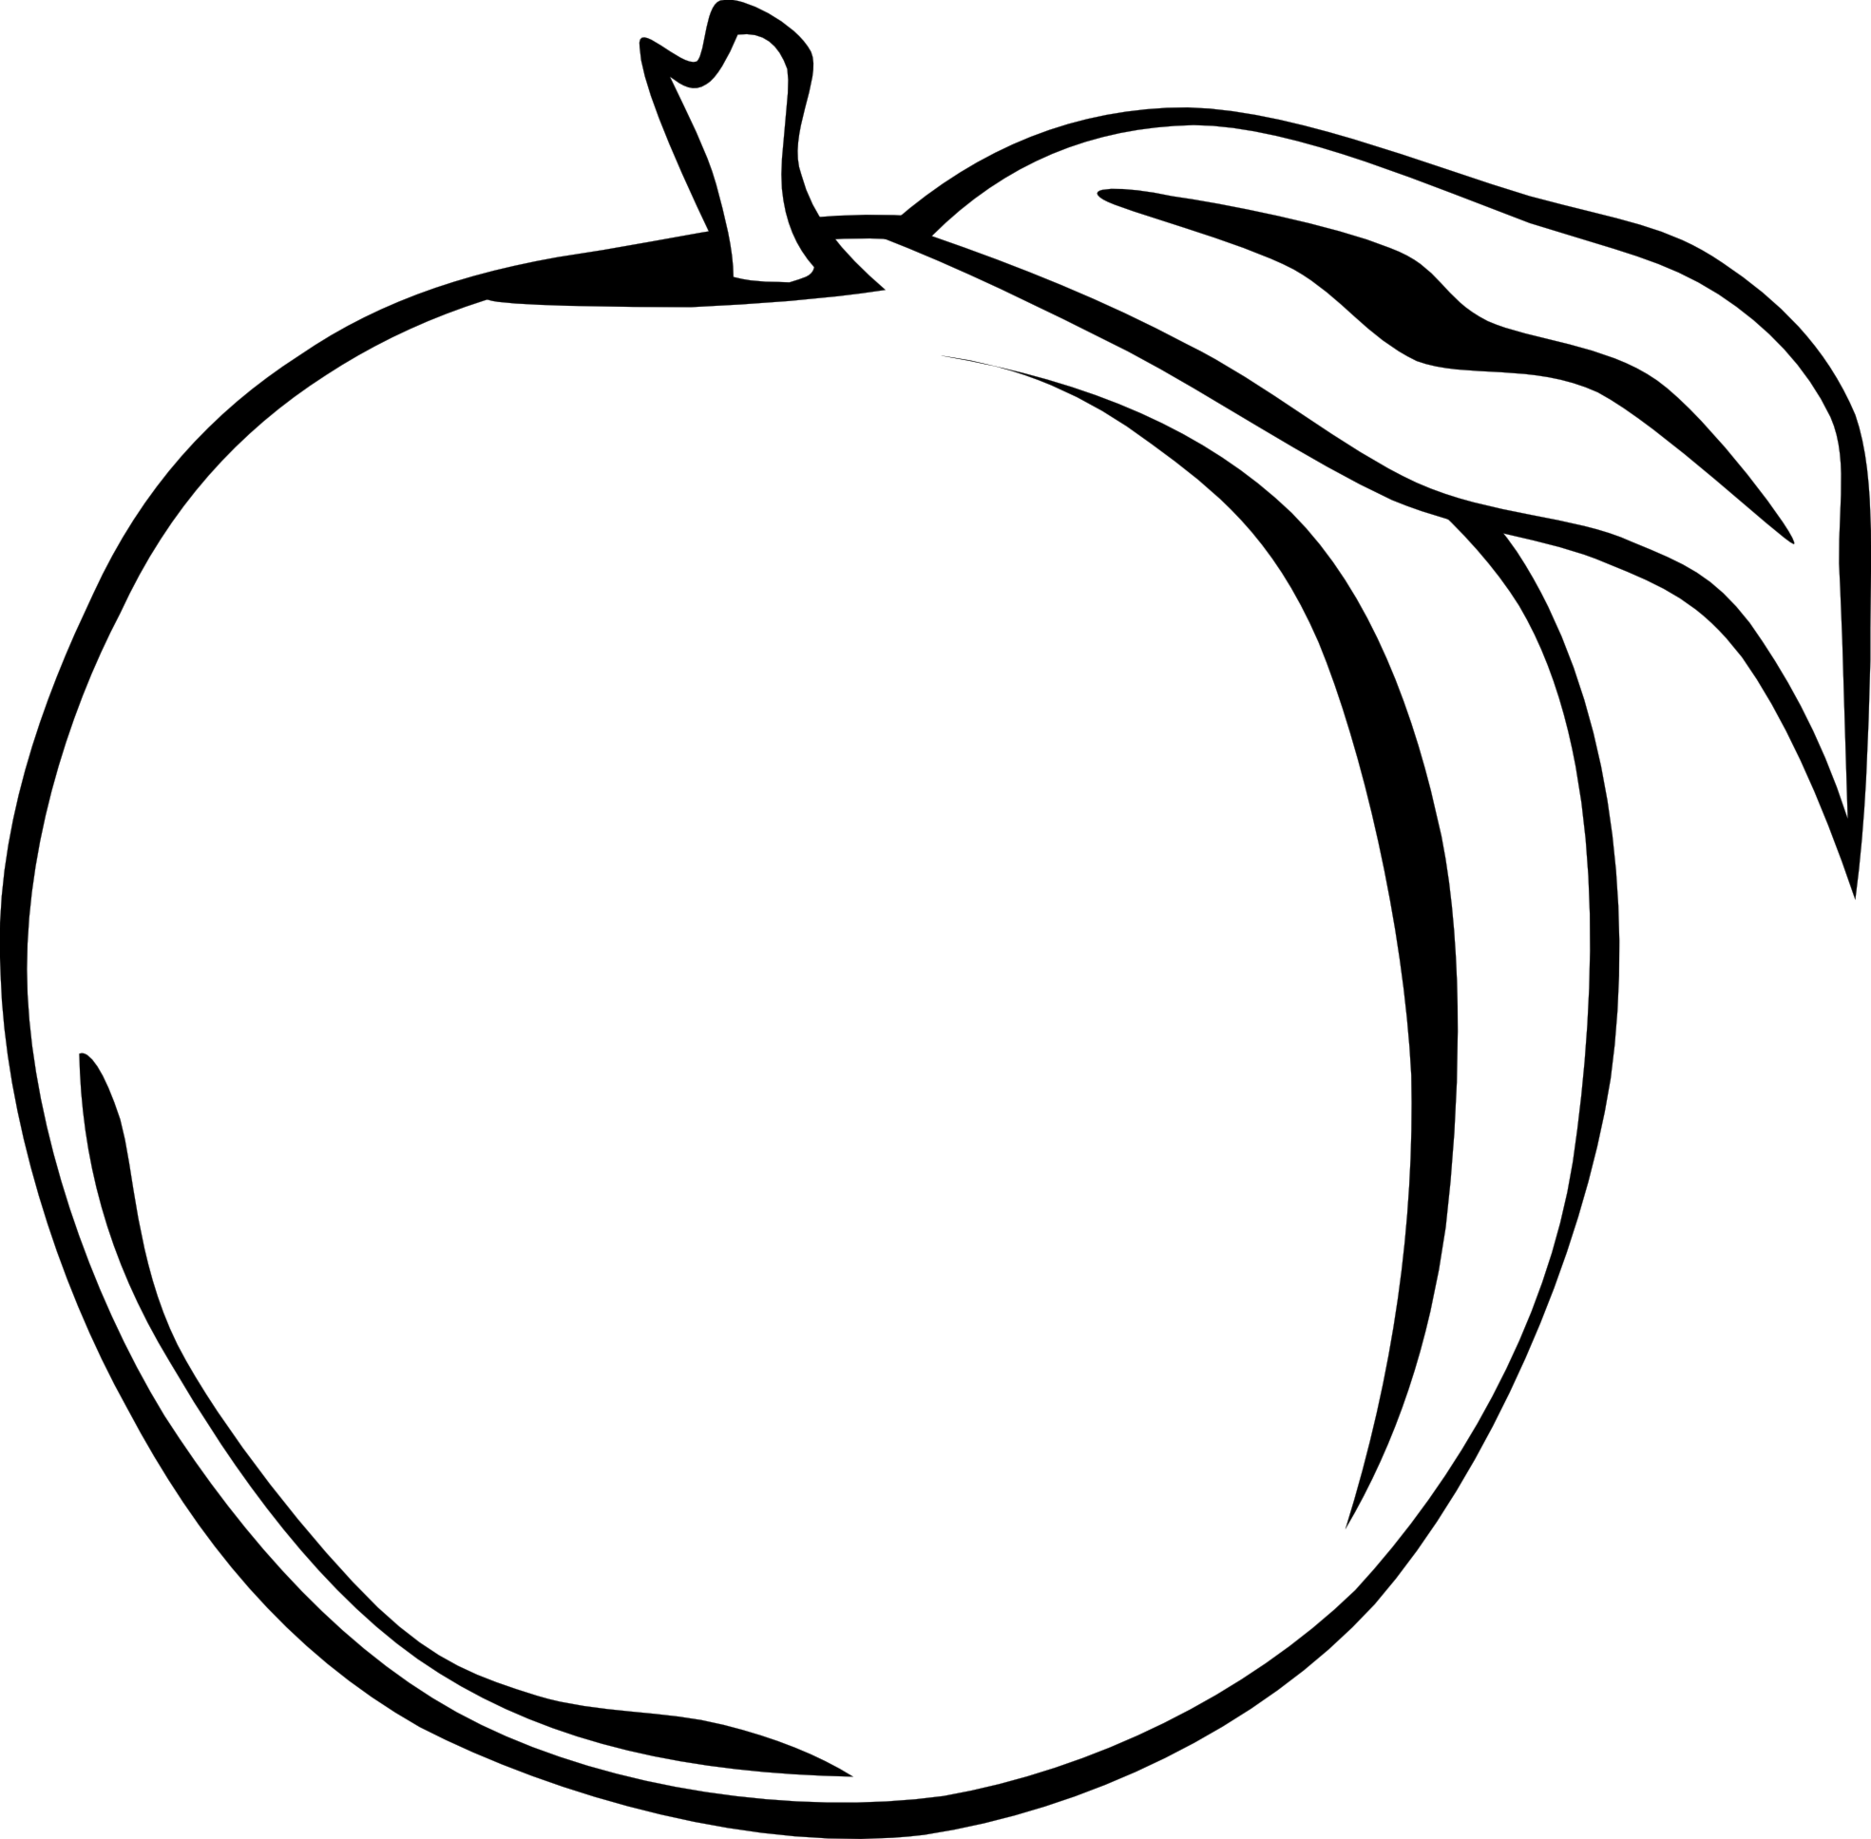 Black And White Pictures Of Fruit Clipart - Free to use Clip Art ...